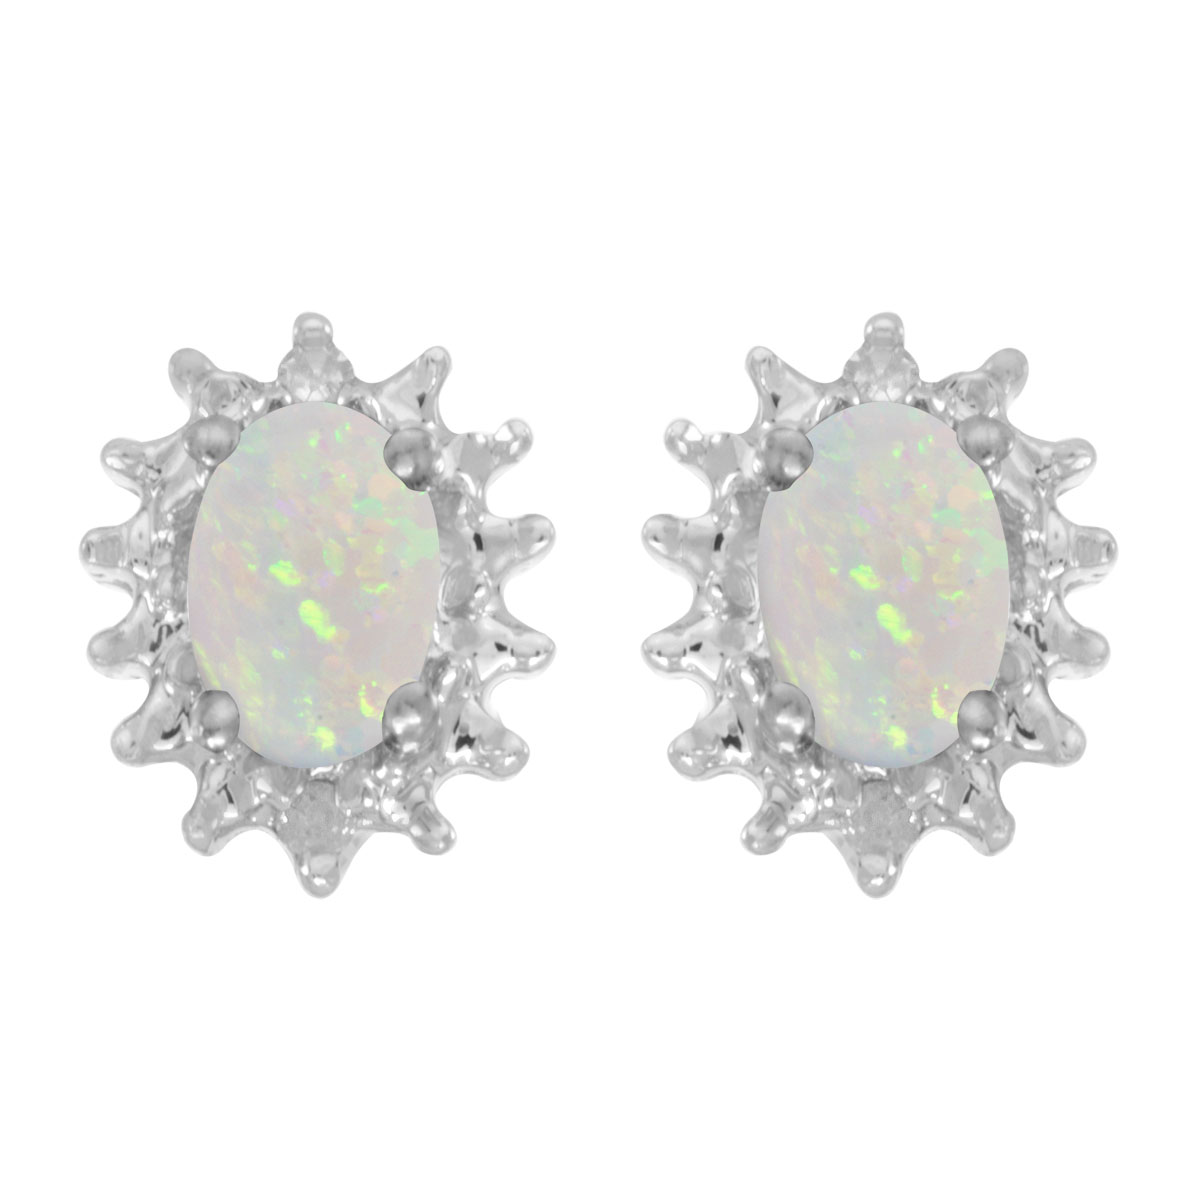 These 14k white gold oval opal and diamond earrings feature 6x4 mm genuine natural opals with a 0...